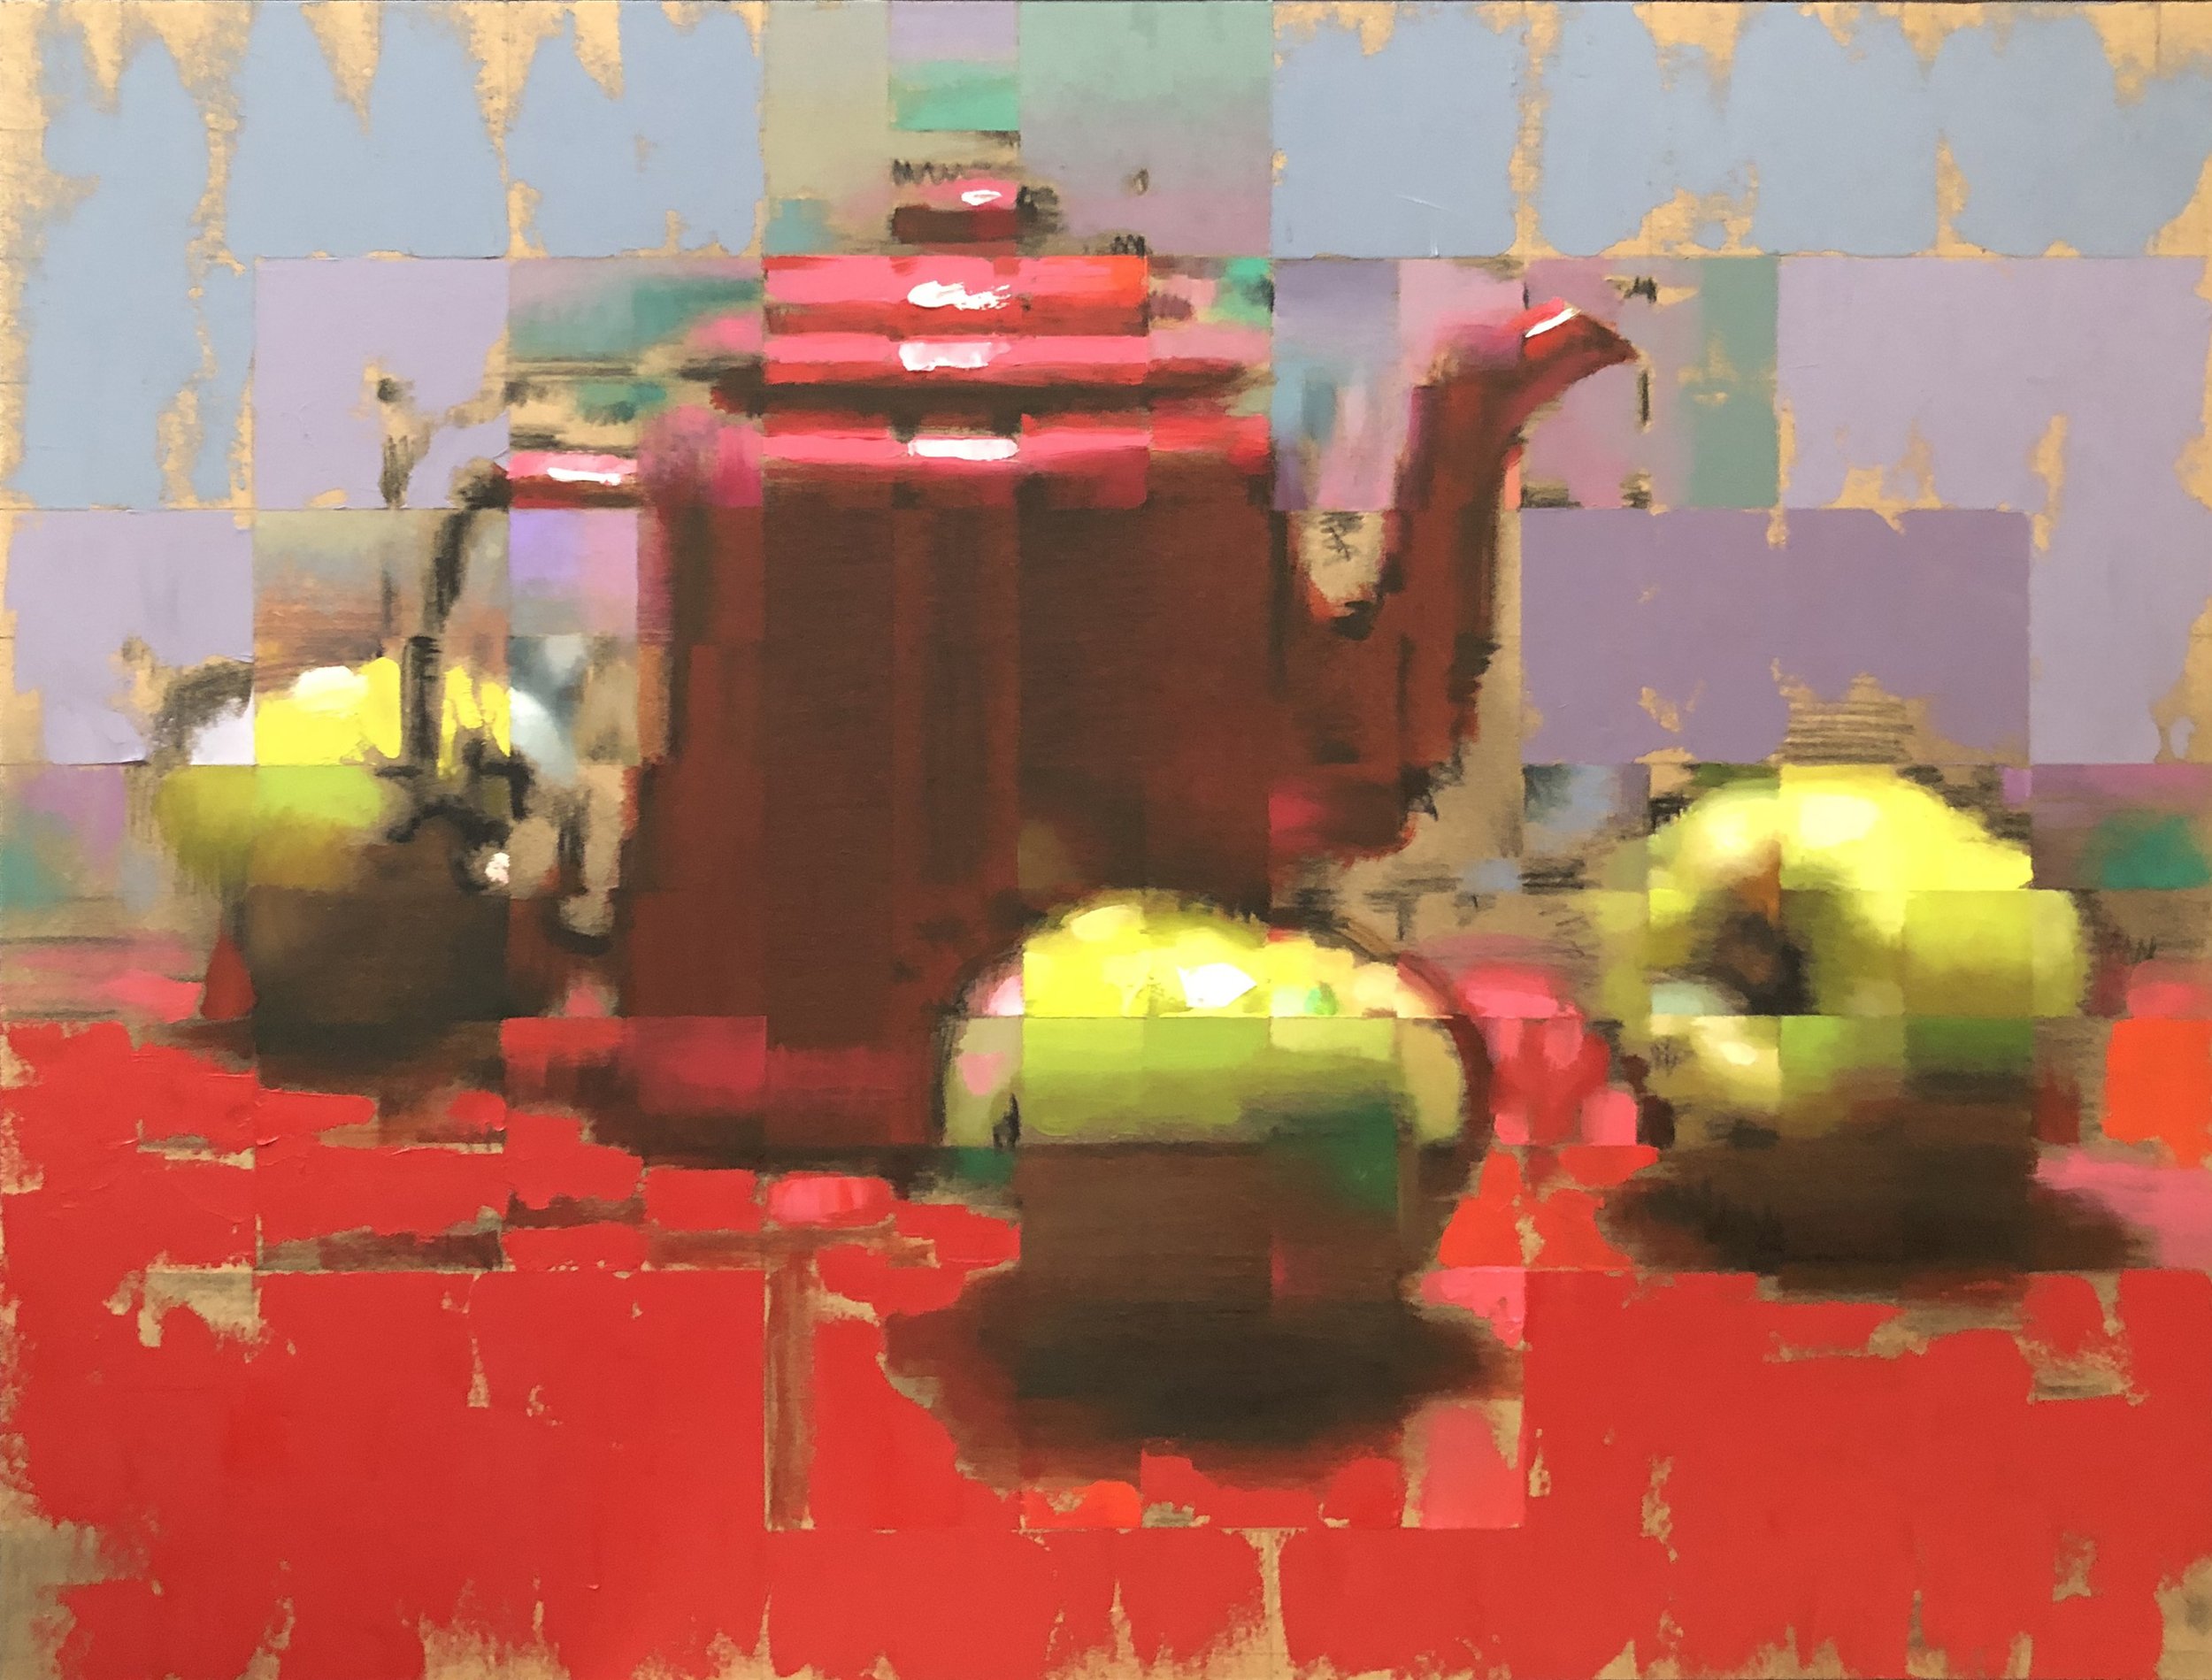 Red Teapot with Apples by Adam Forfang